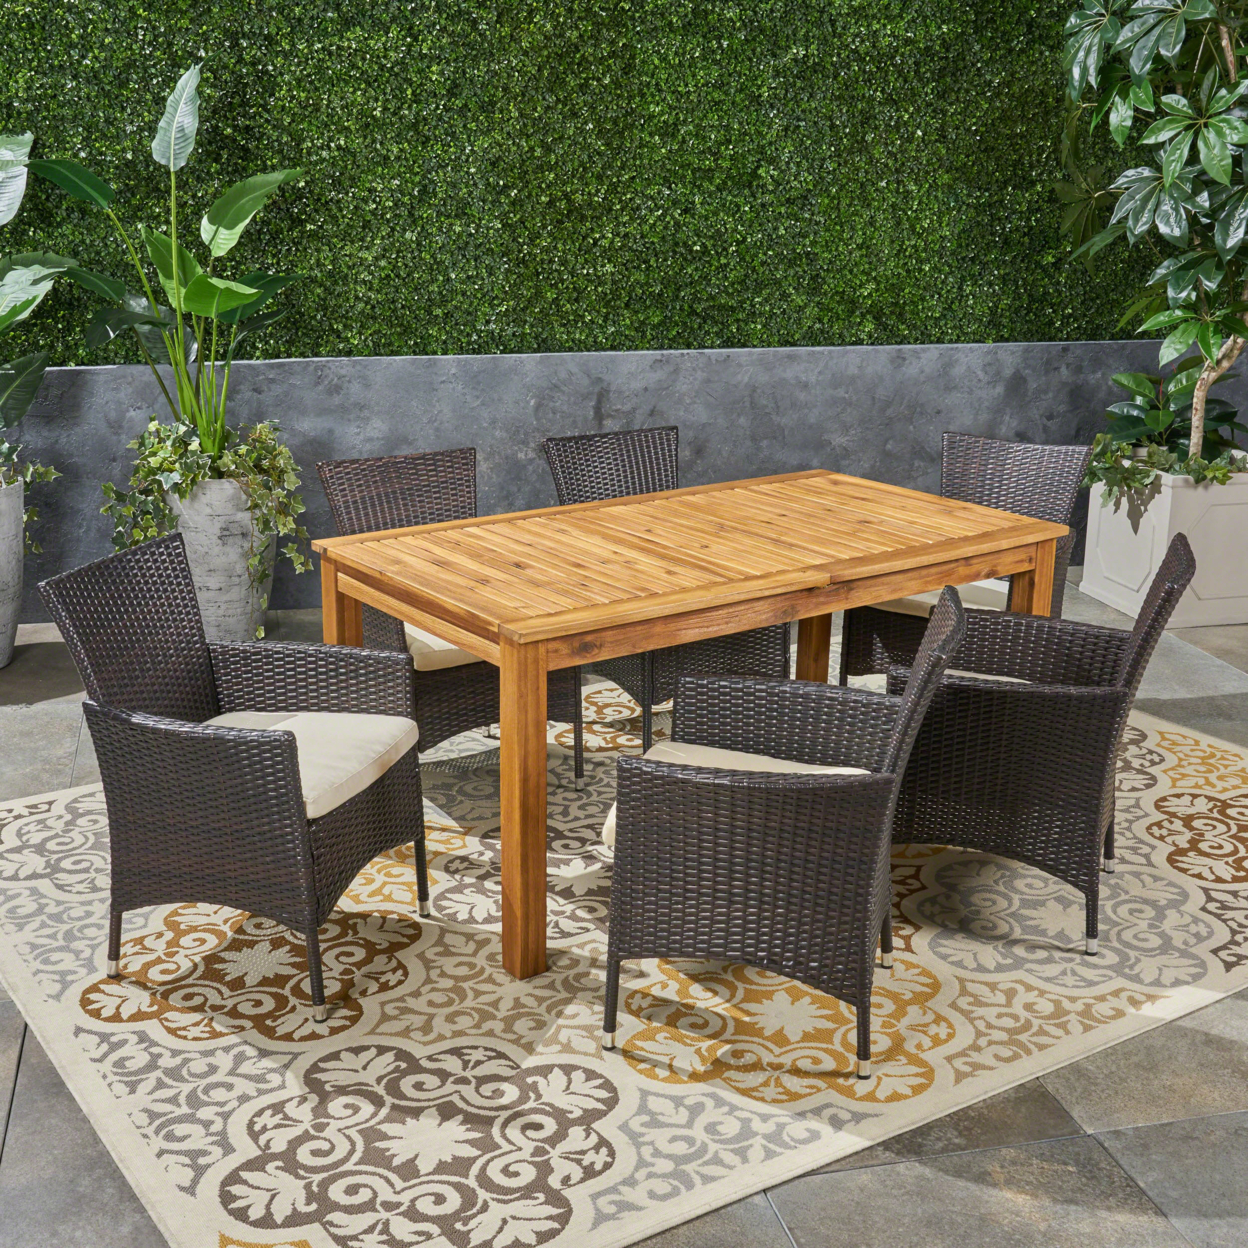 Austin Outdoor Wood And Wicker Expandable Dining Set - Natural Stained + Multi Brown + Beige, 7-Piece Set